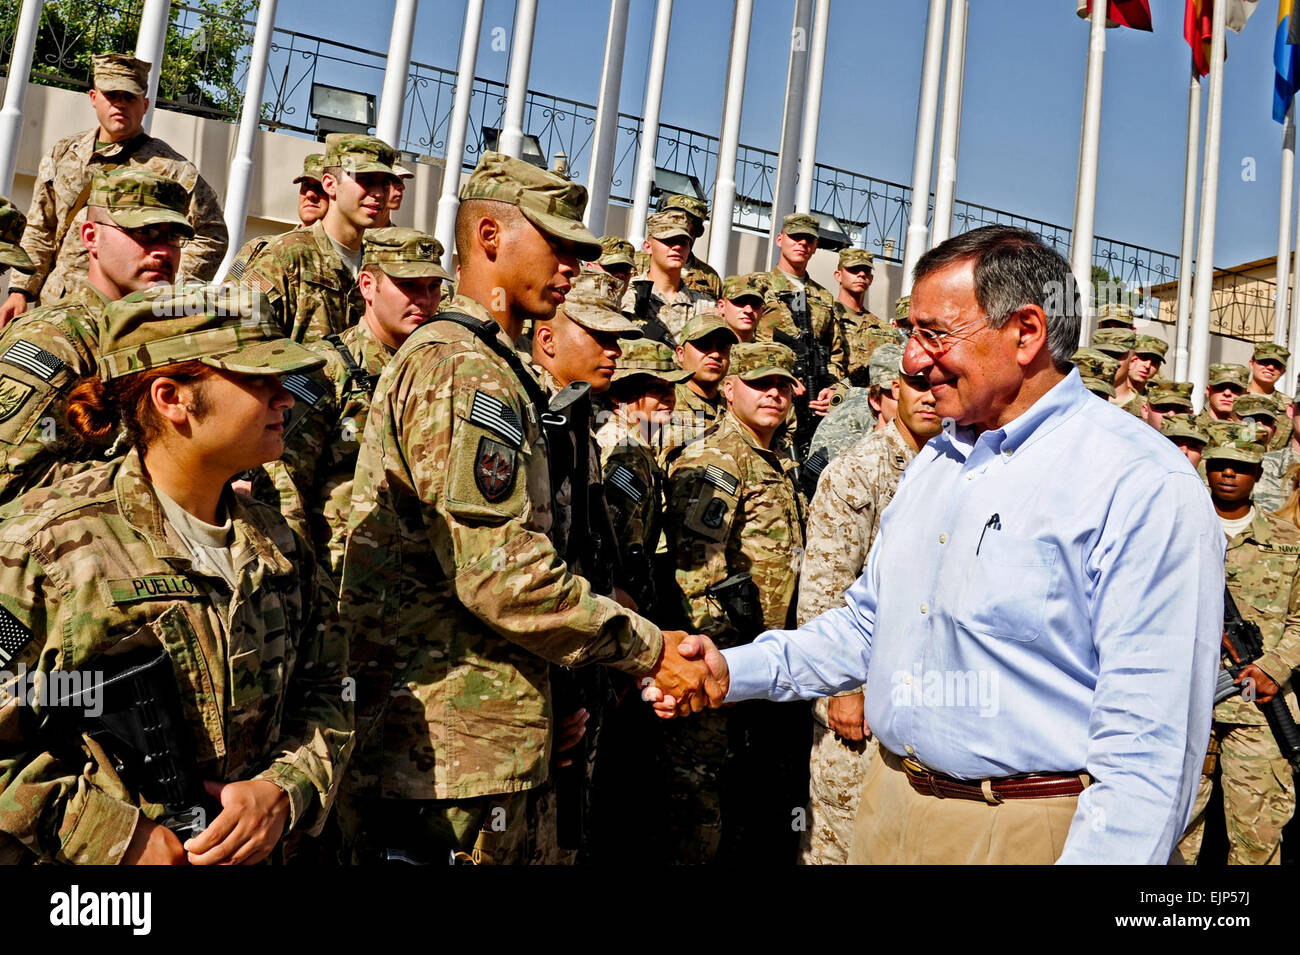 U.S. Secretary of Defense Leon E. Panetta meets with troops at Camp Eggers, Kabul, Afghanistan, July 10, 2011.  Tech. Sgt. Jacob N. Bailey, U.S. Air Force Stock Photo